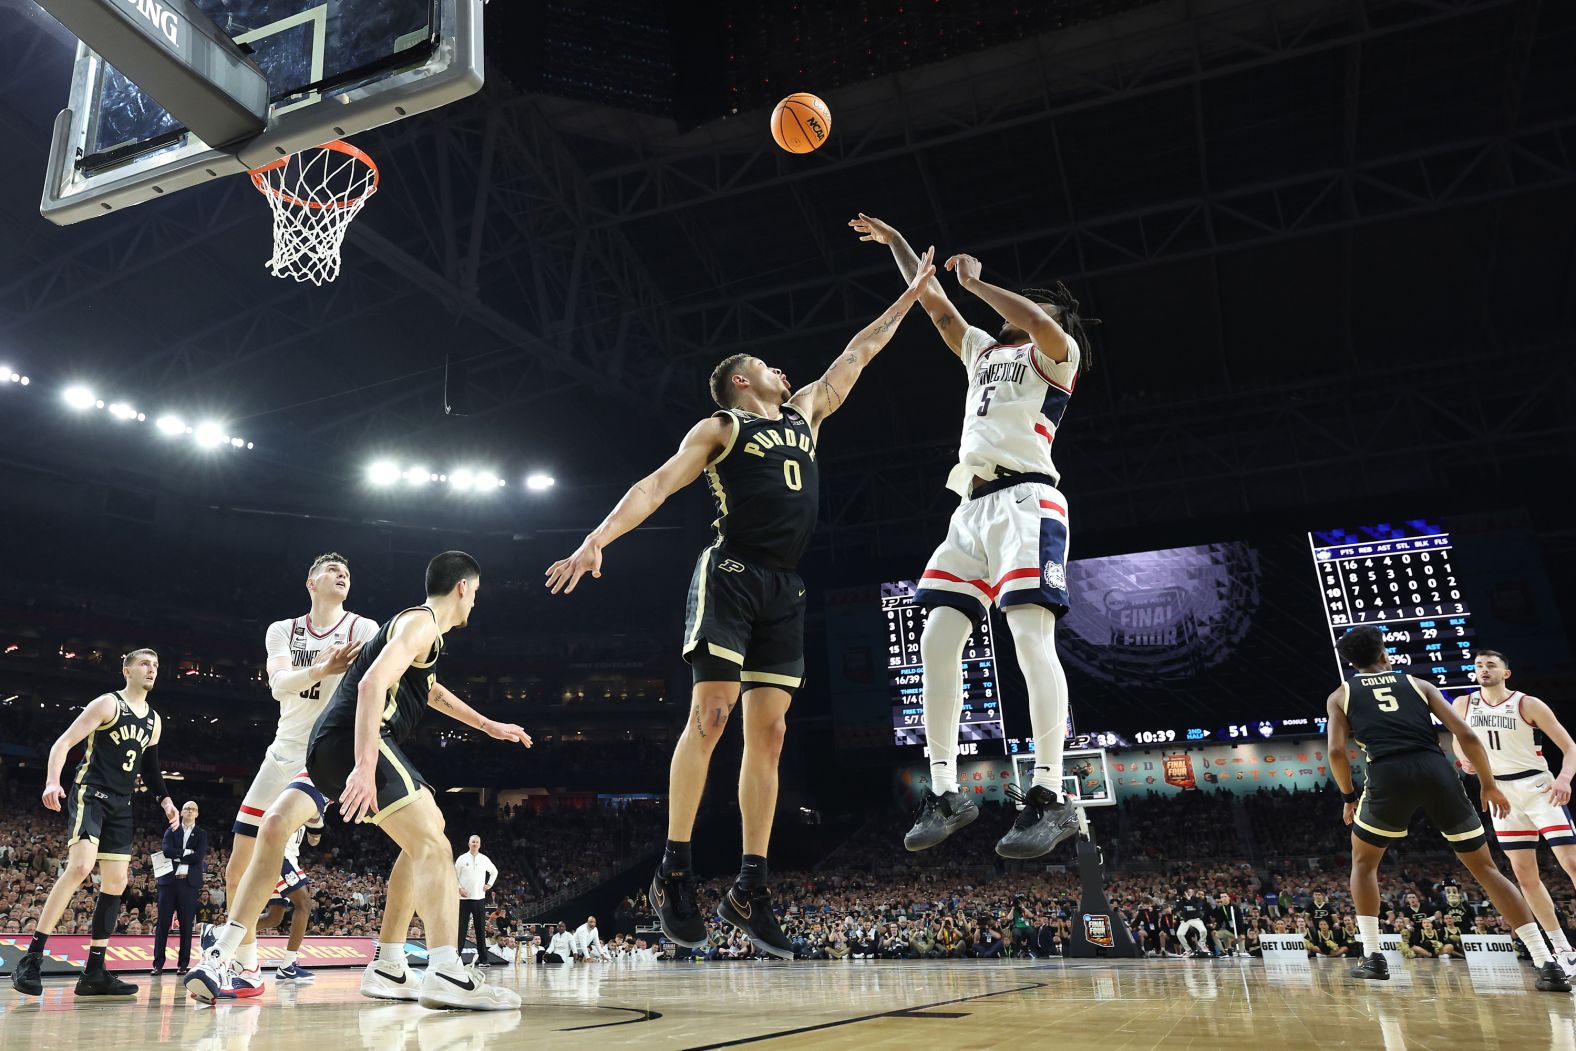 UConn's Stephon Castle attempts a shot while being guarded by Purdue's Mason Gillis.